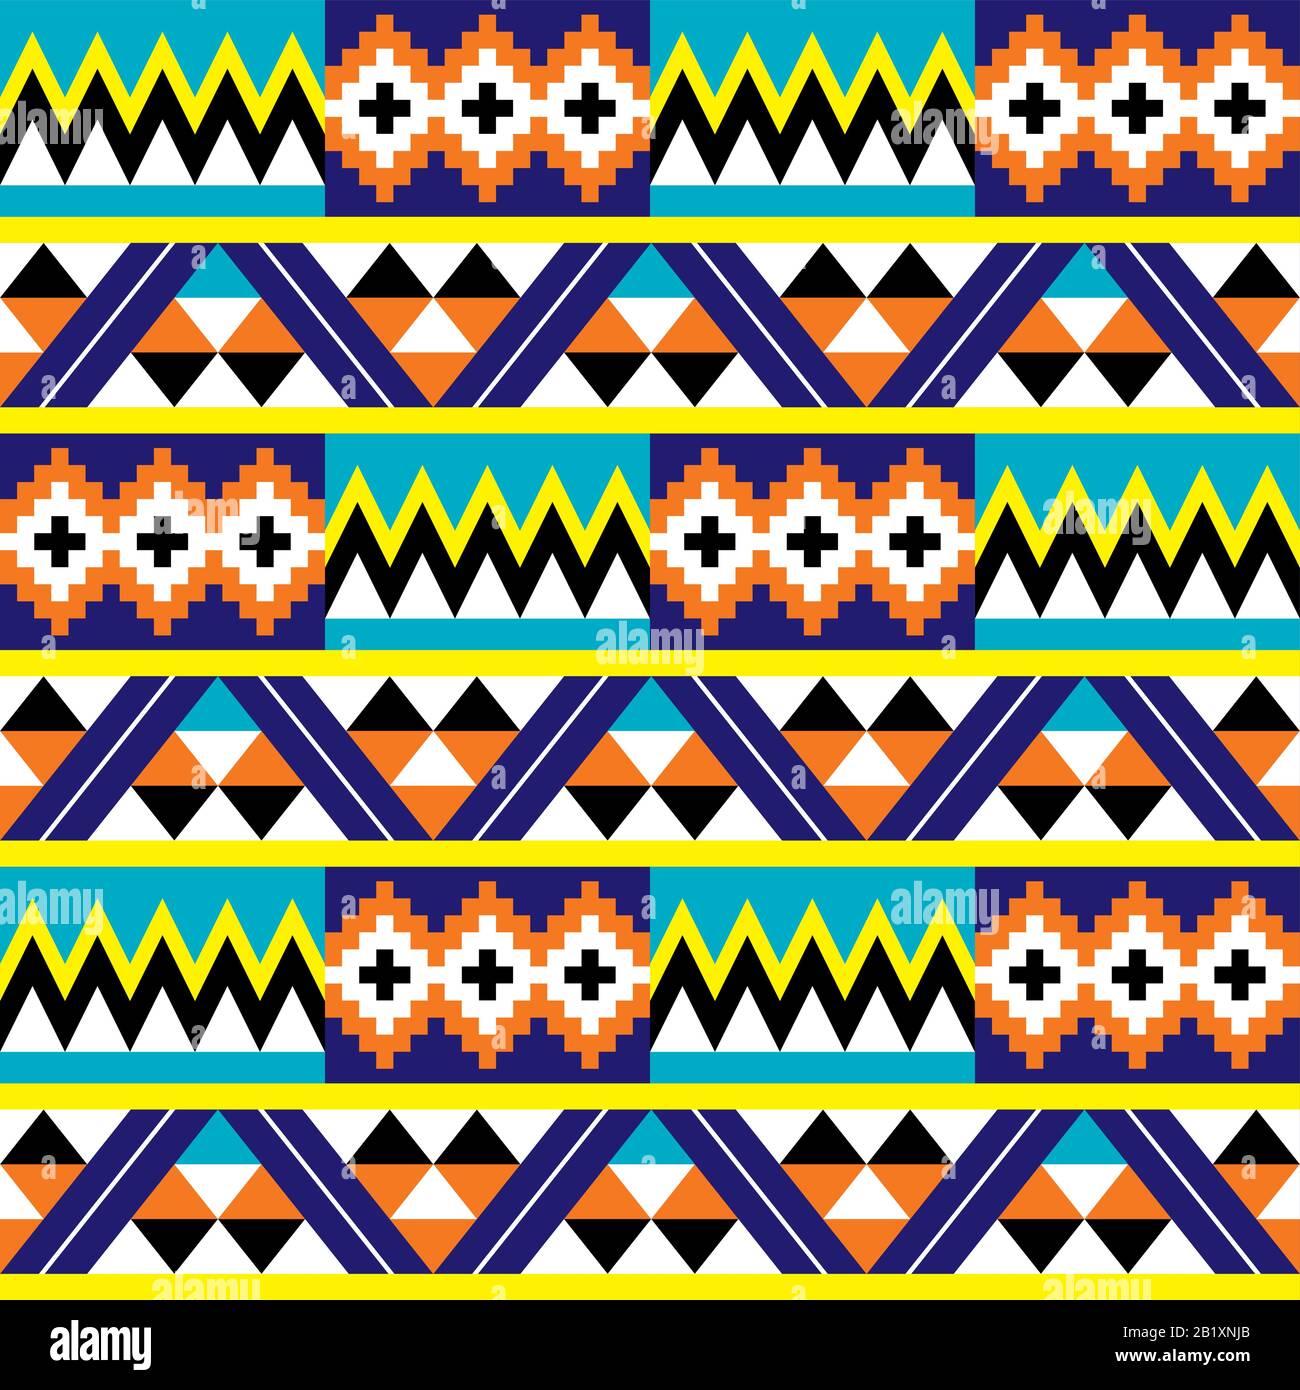 African Tribal Kente Cloth Style Vector Seamless Textile Pattern  Traditional Geometric Nwentoma Design From Ghana Stock Illustration -  Download Image Now - iStock